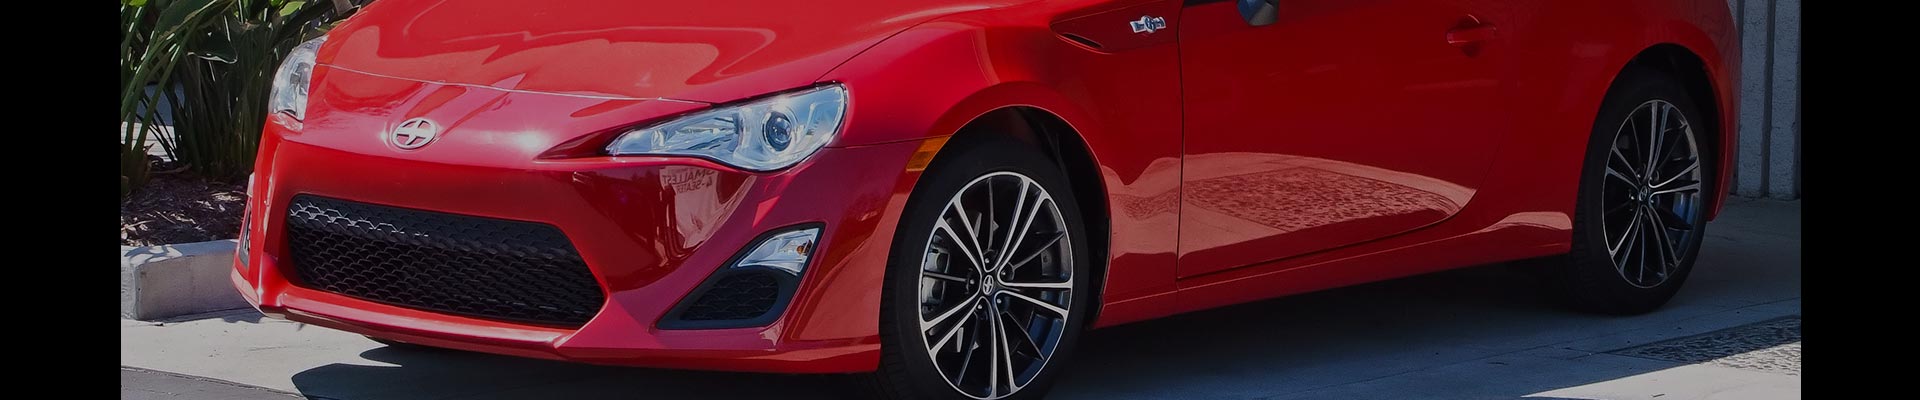 Shop Replacement and OEM Scion FR-S Parts with Discounted Price on the Net